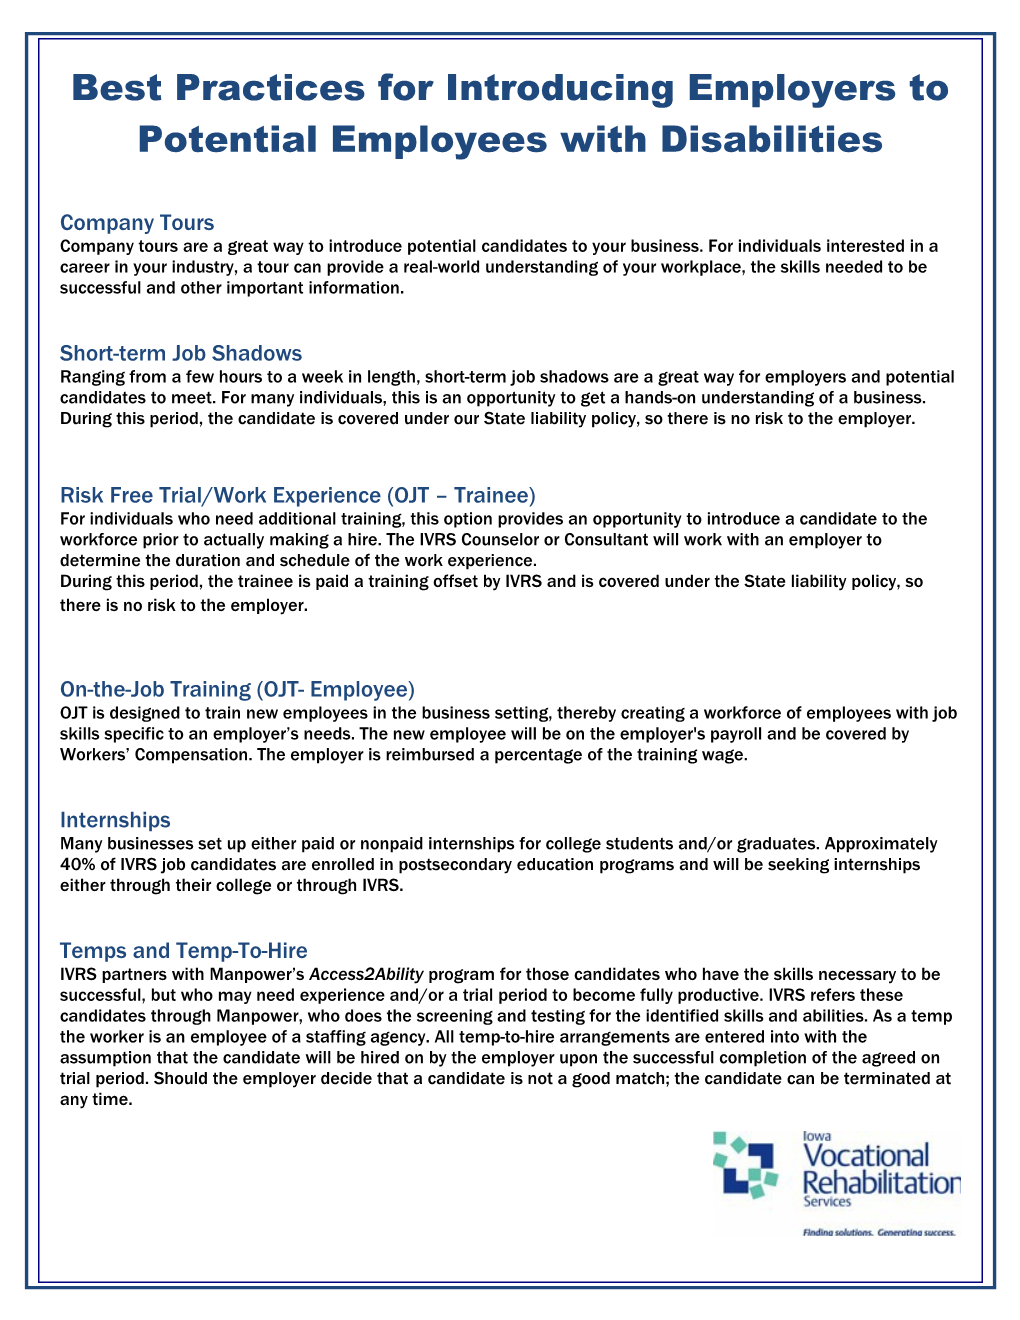 Best Practices for Introducing Employers to Potential Employees with Disabilities